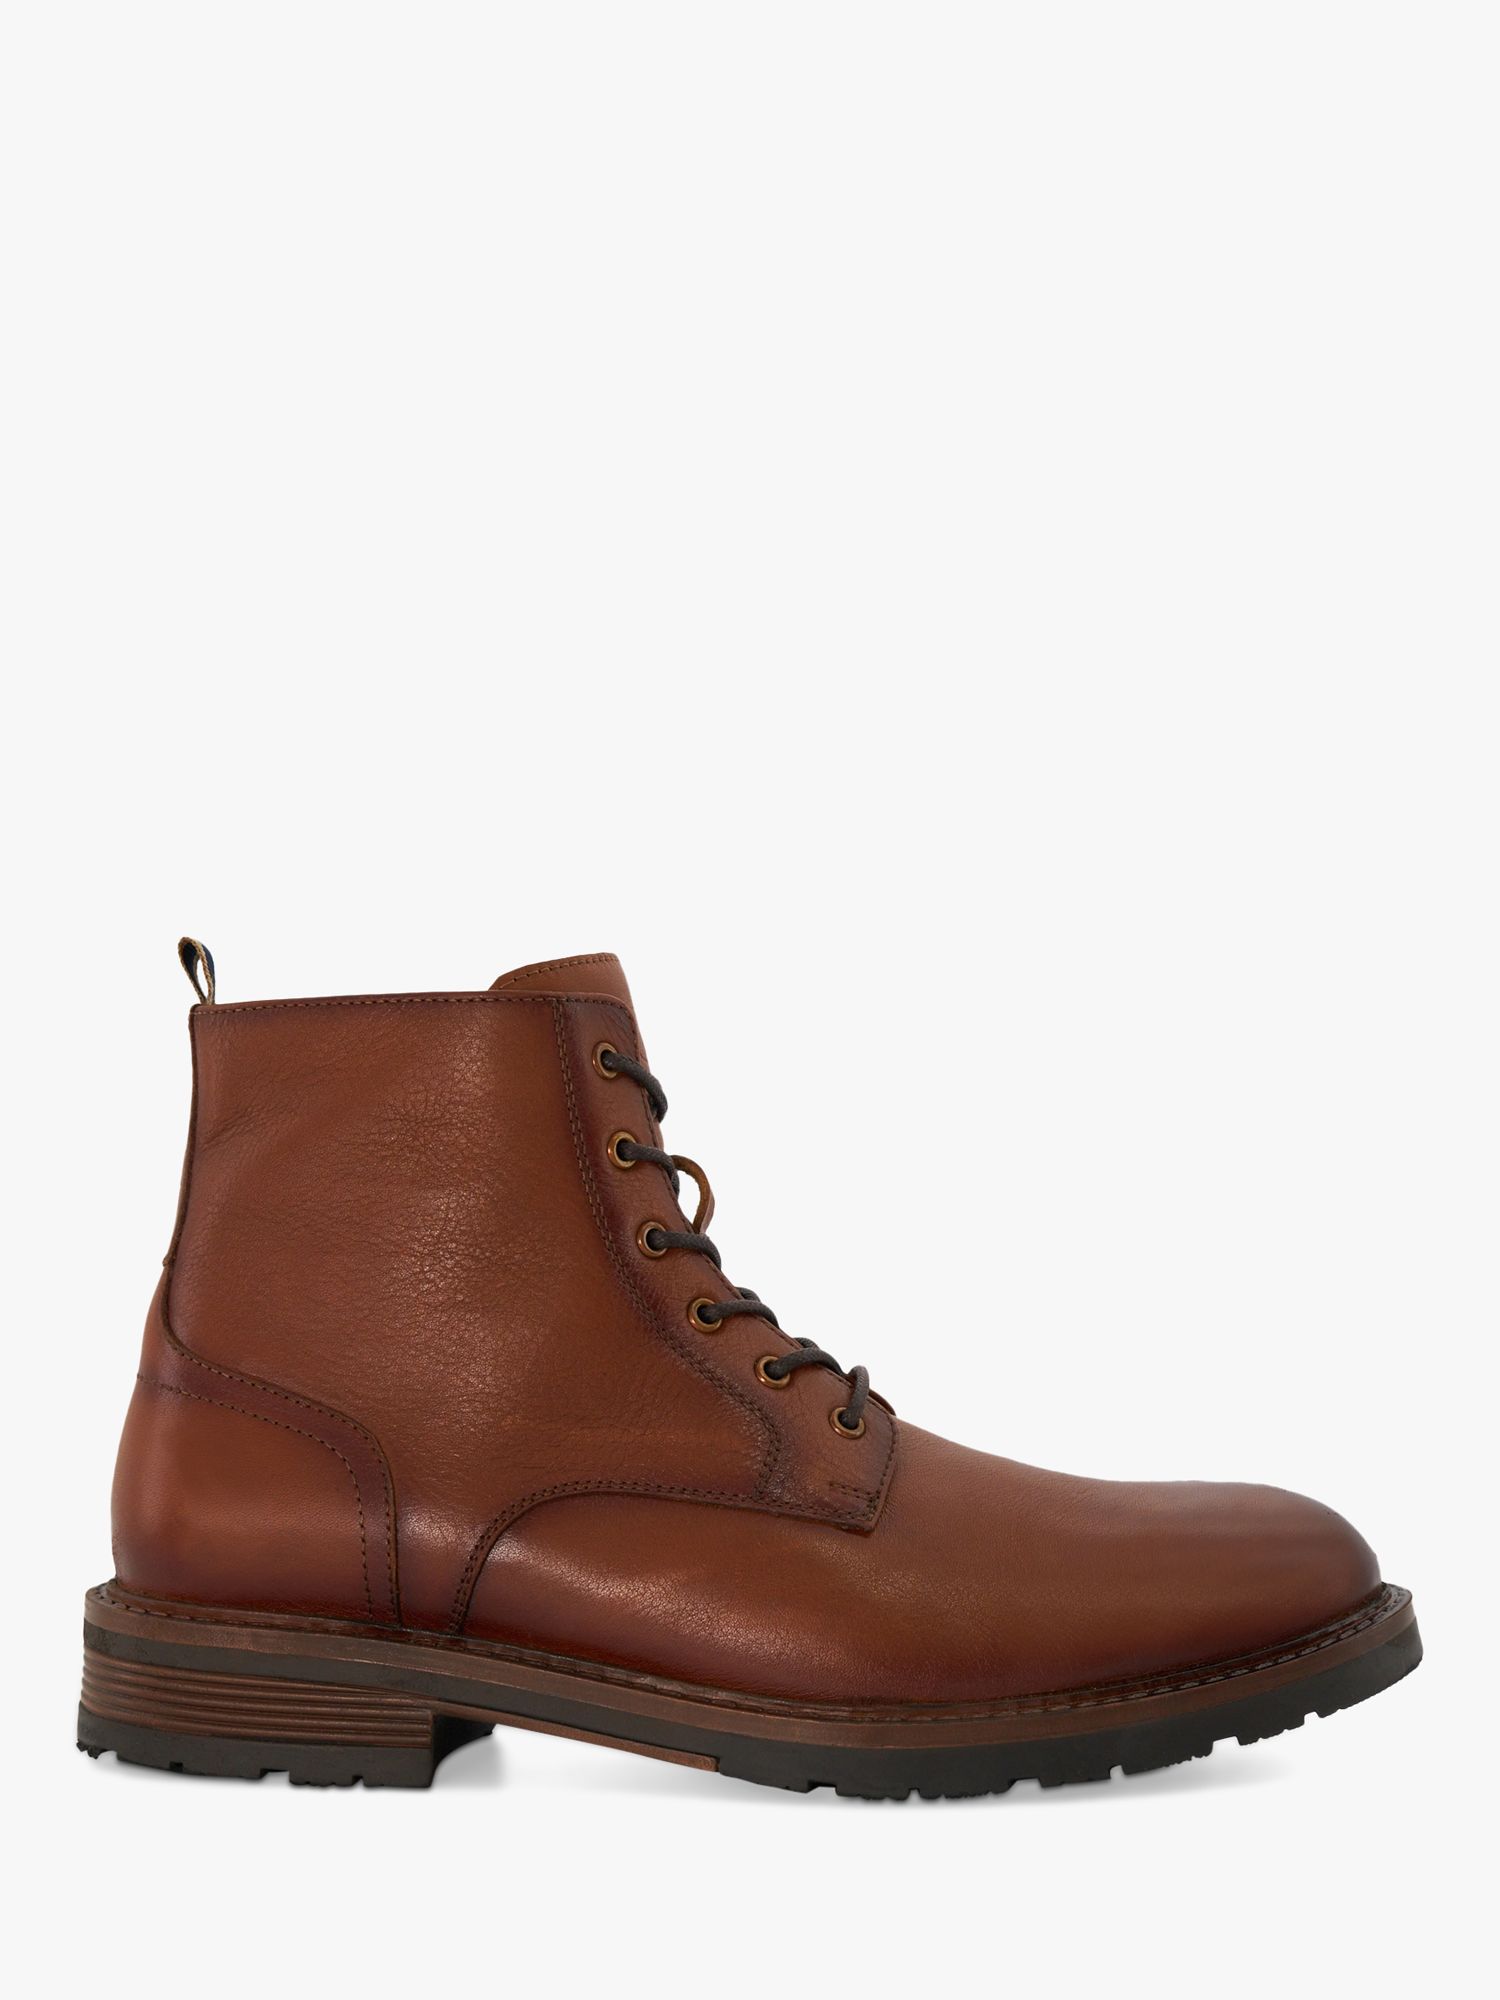 Dune Cheshires Leather Boots, Tan at John Lewis & Partners